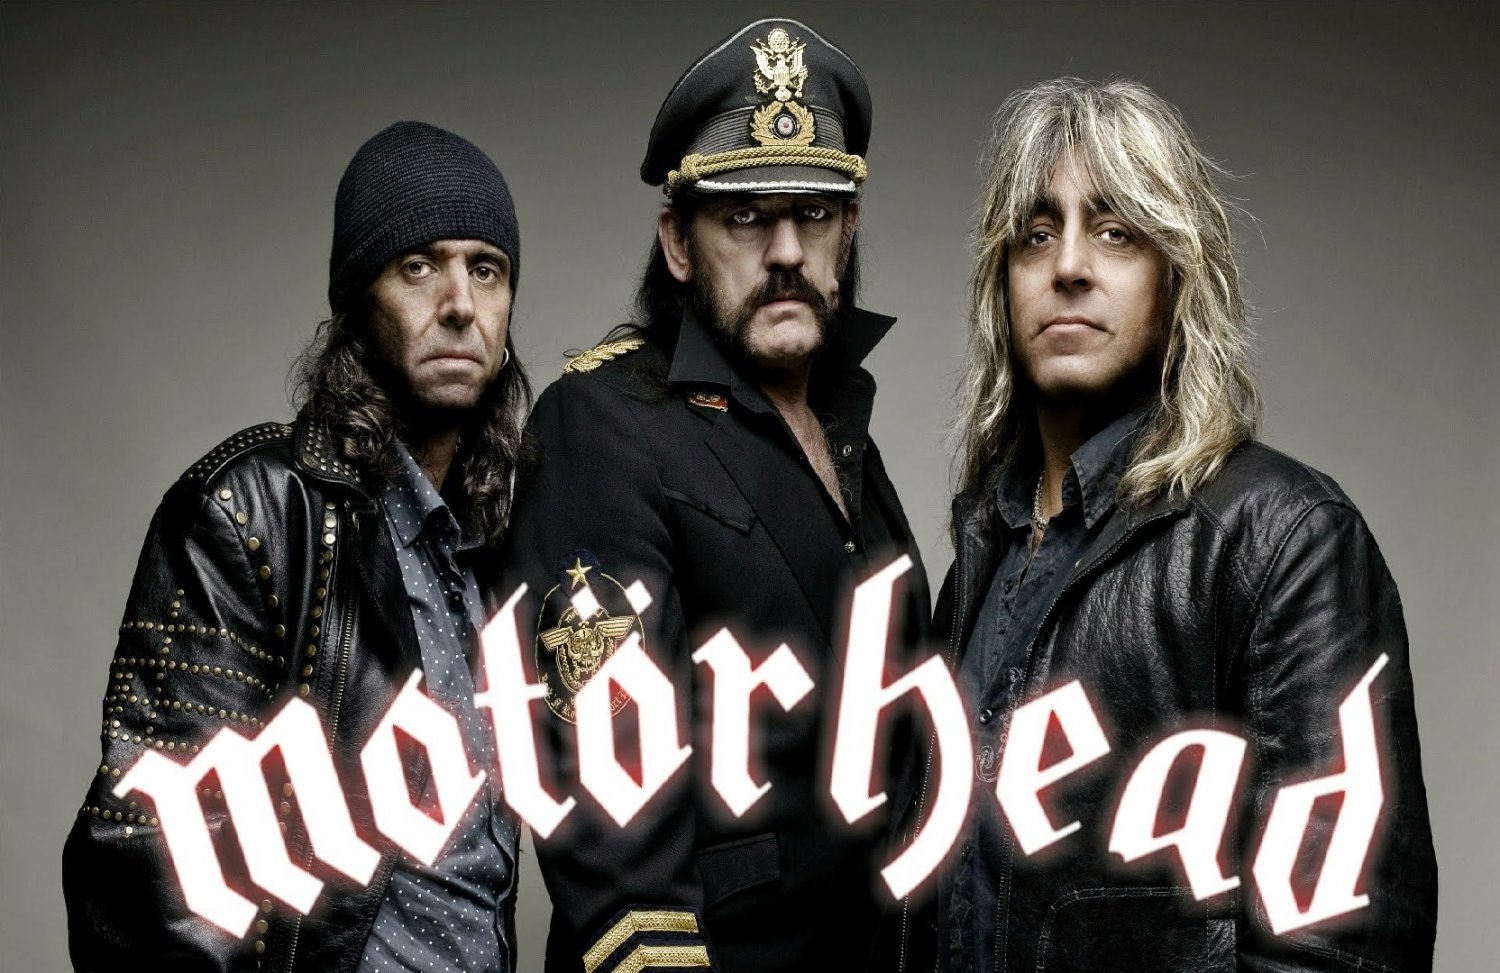 Motorhead Style B Musical Poster 13x19 inches